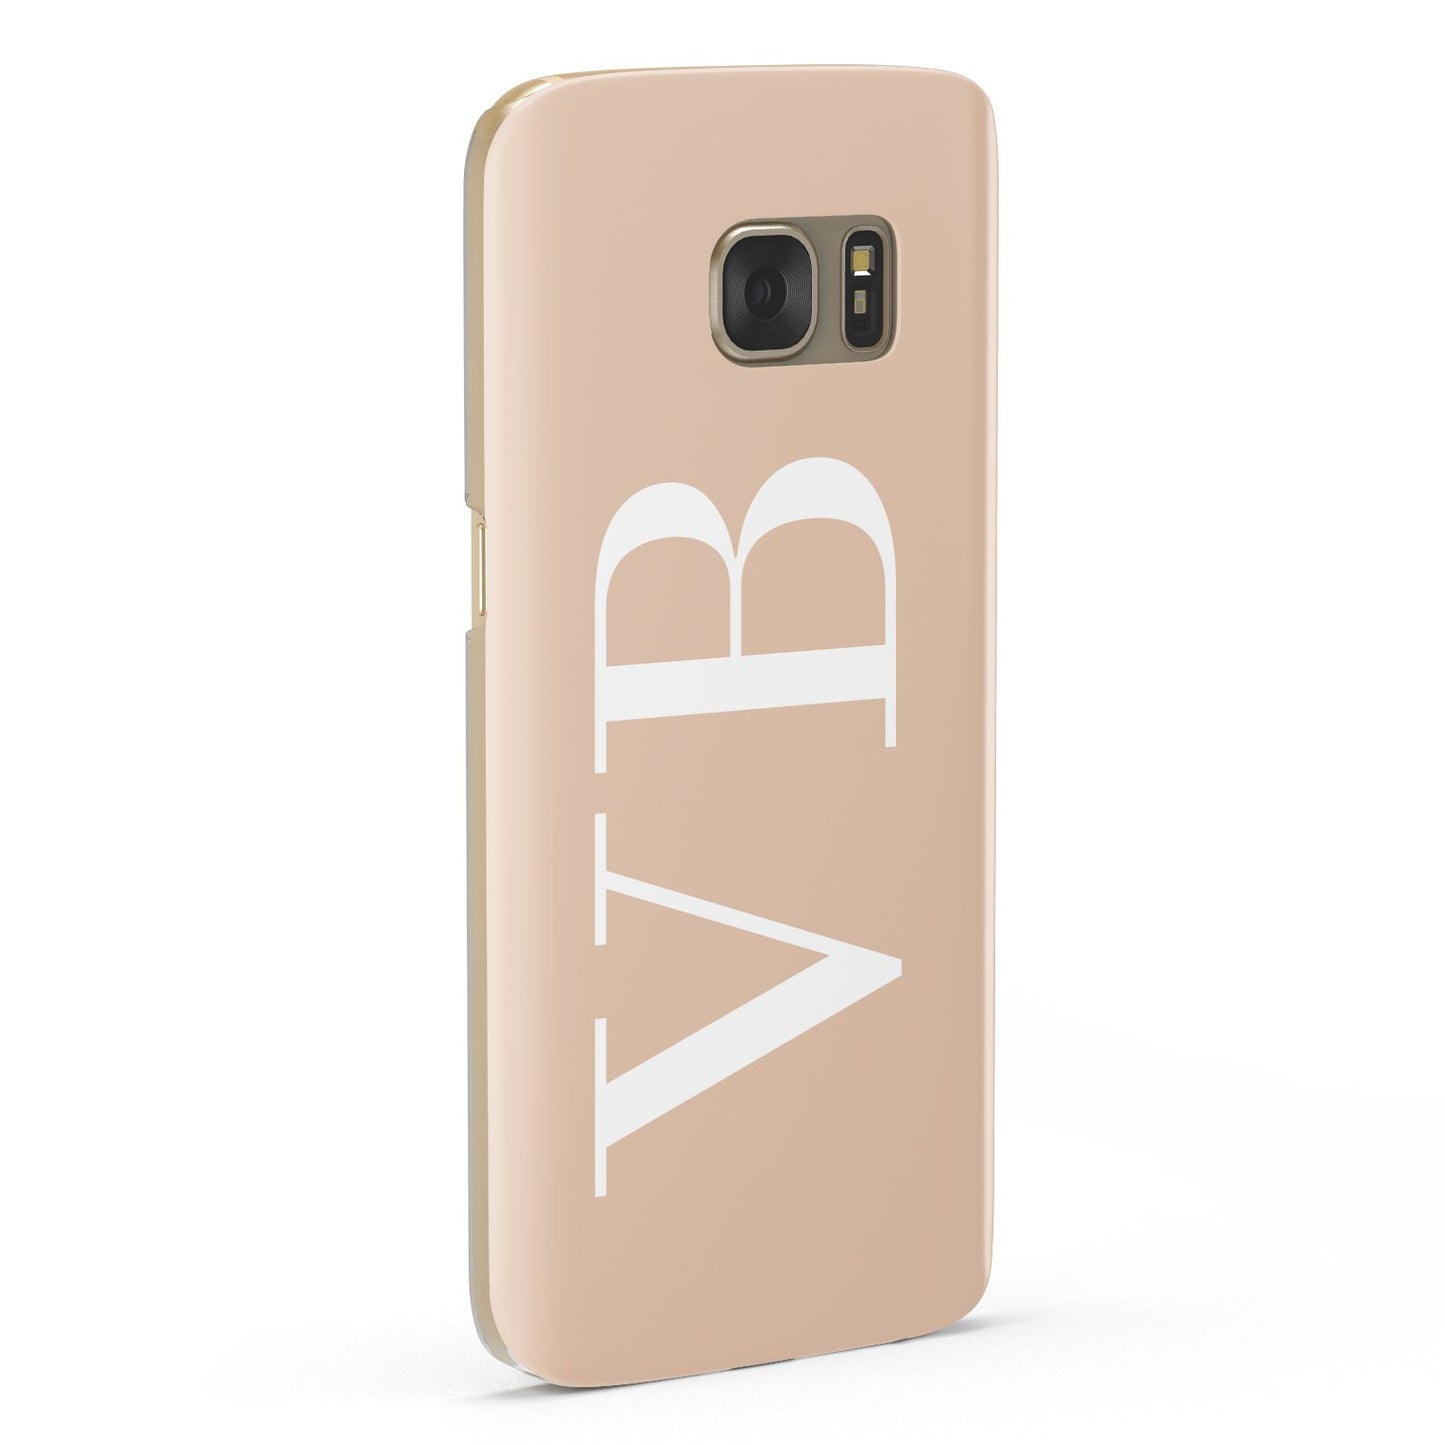 Nude And White Personalised Samsung Galaxy Case Fourty Five Degrees